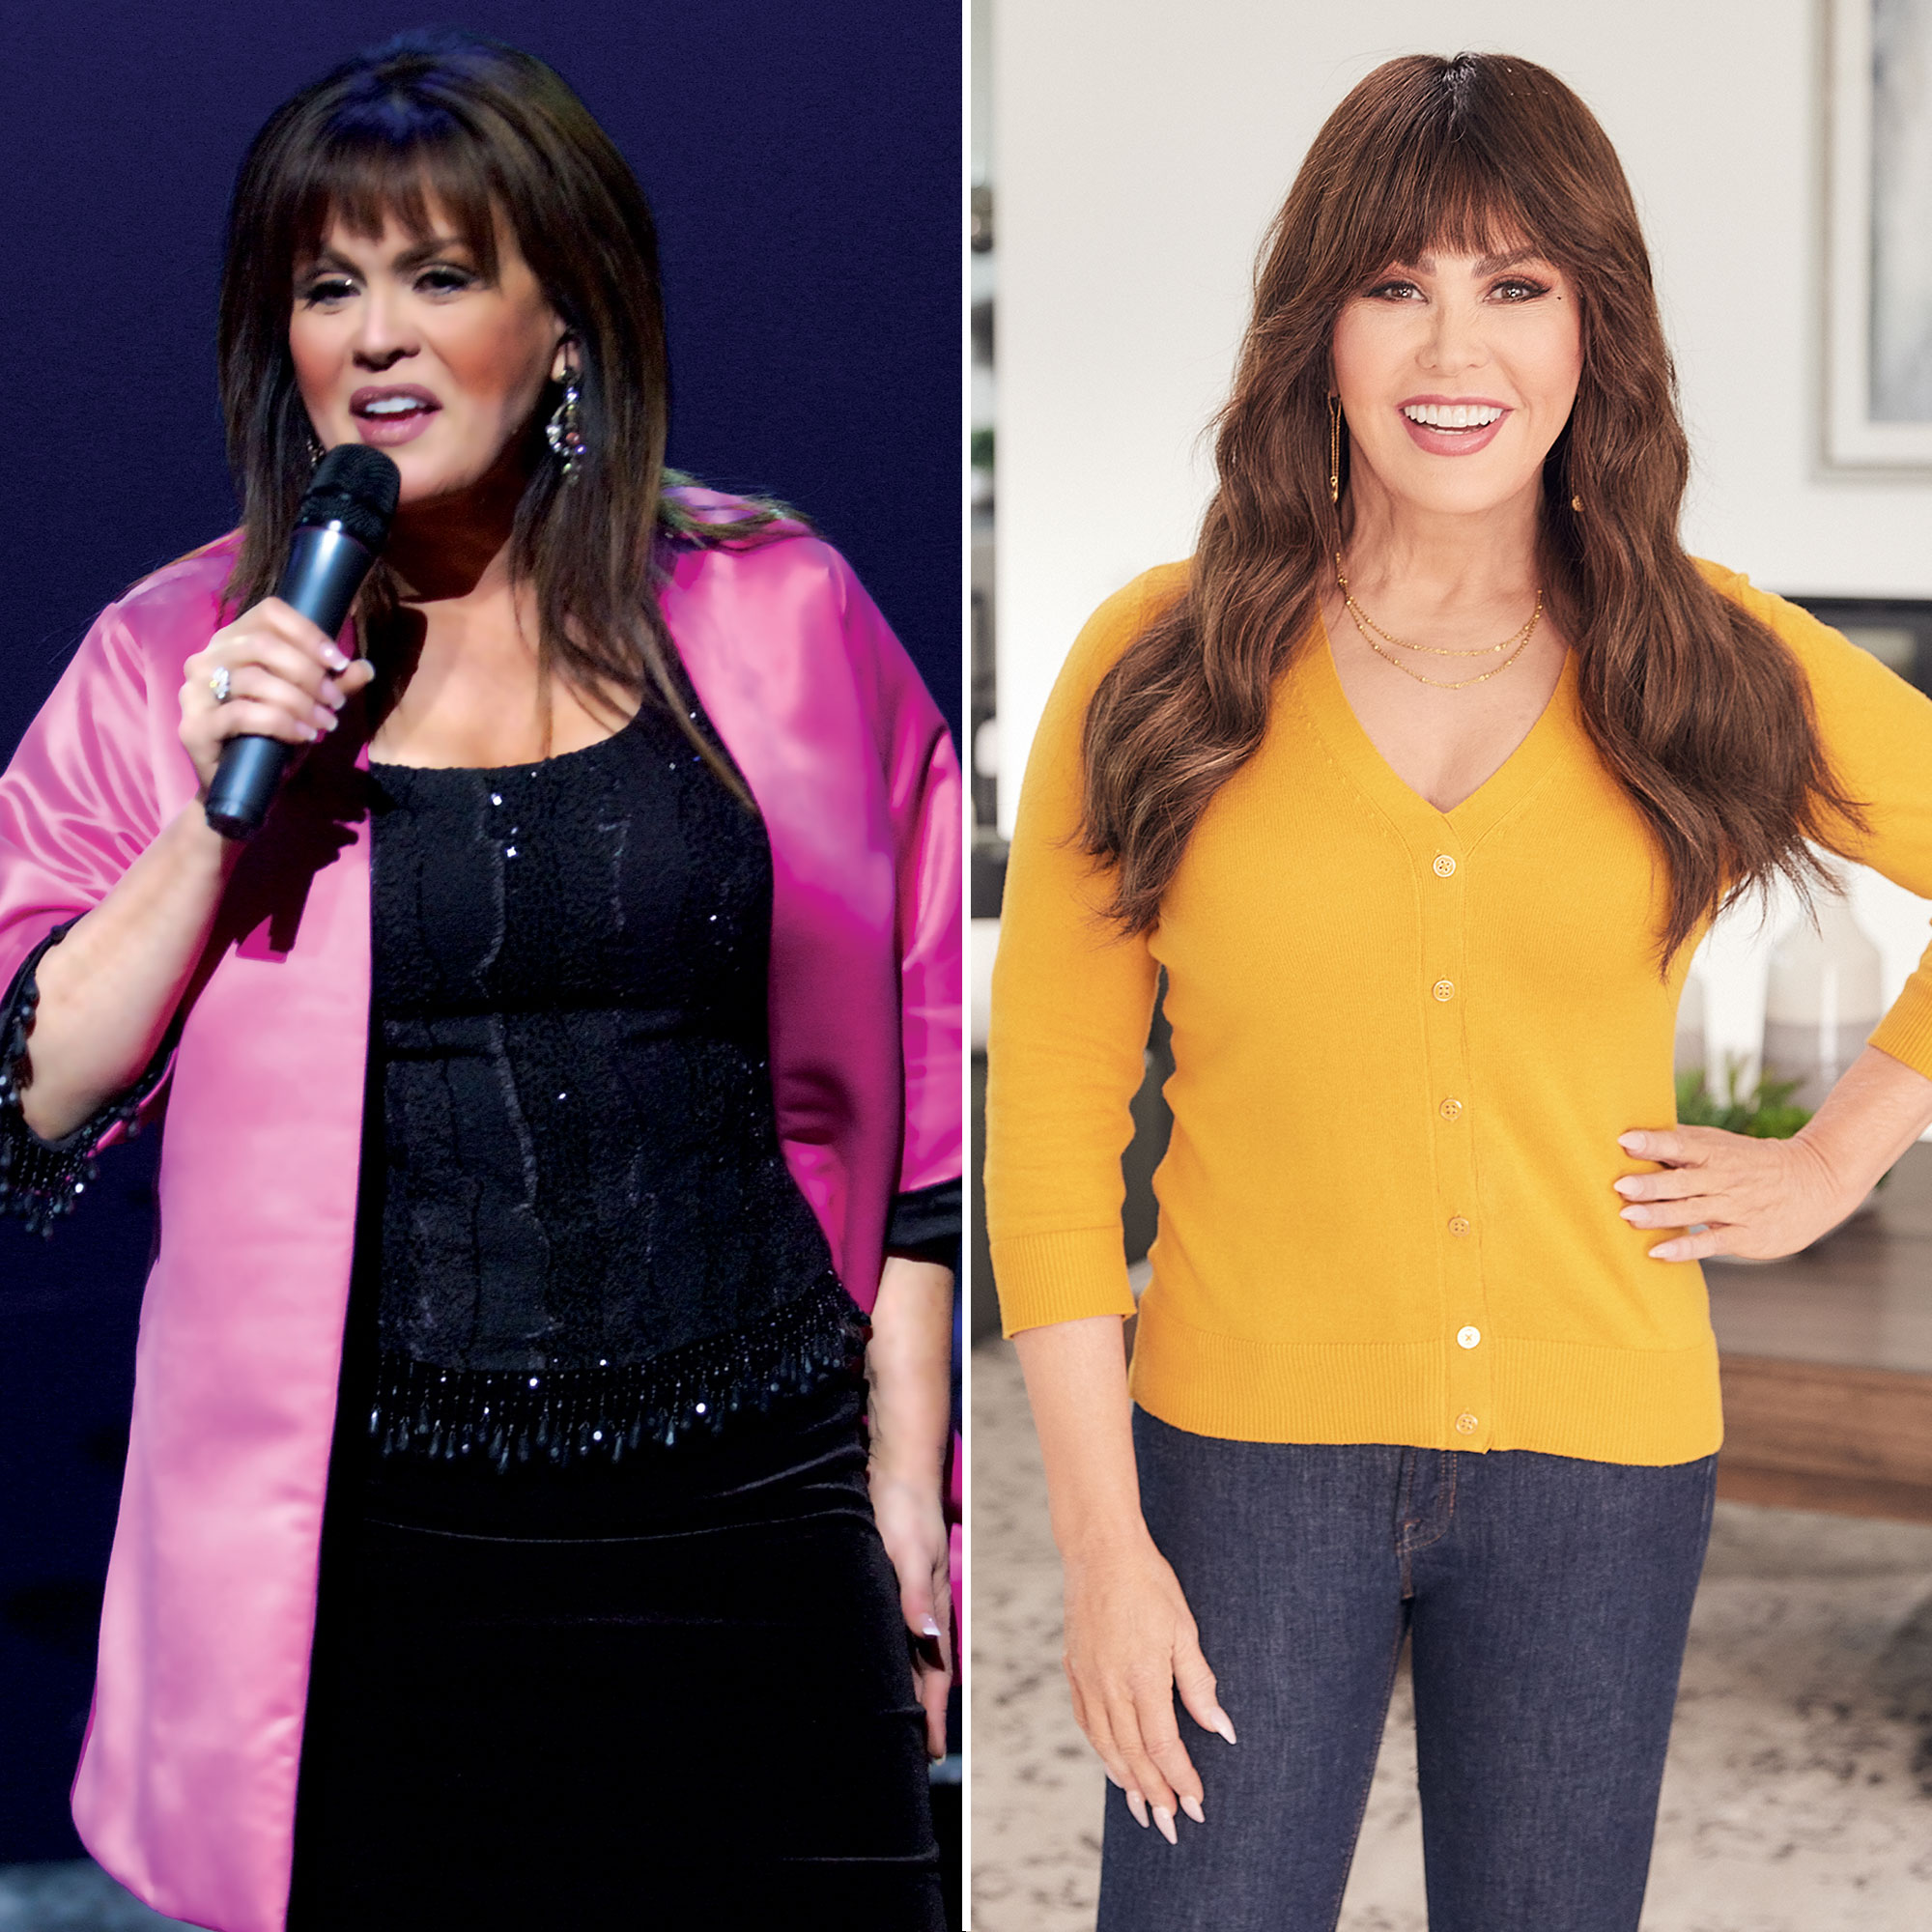 Marie Osmond's No. 1 Weight Loss Tip After Losing 50 Pounds